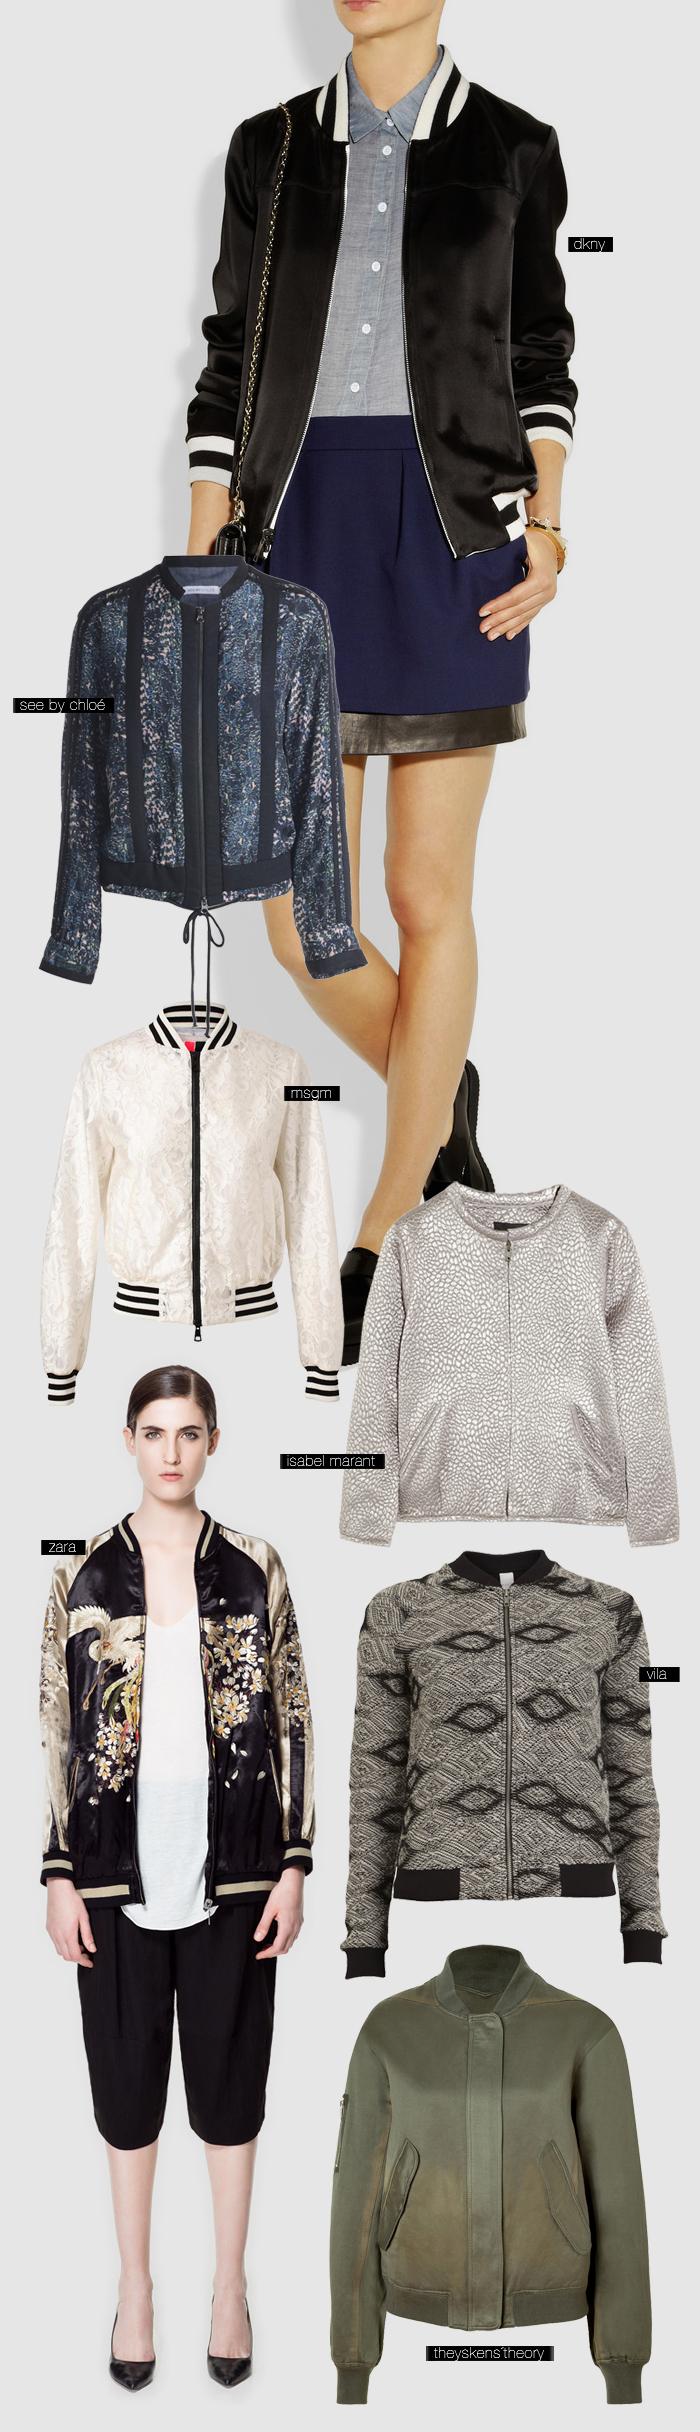 trend report... bomber jackets